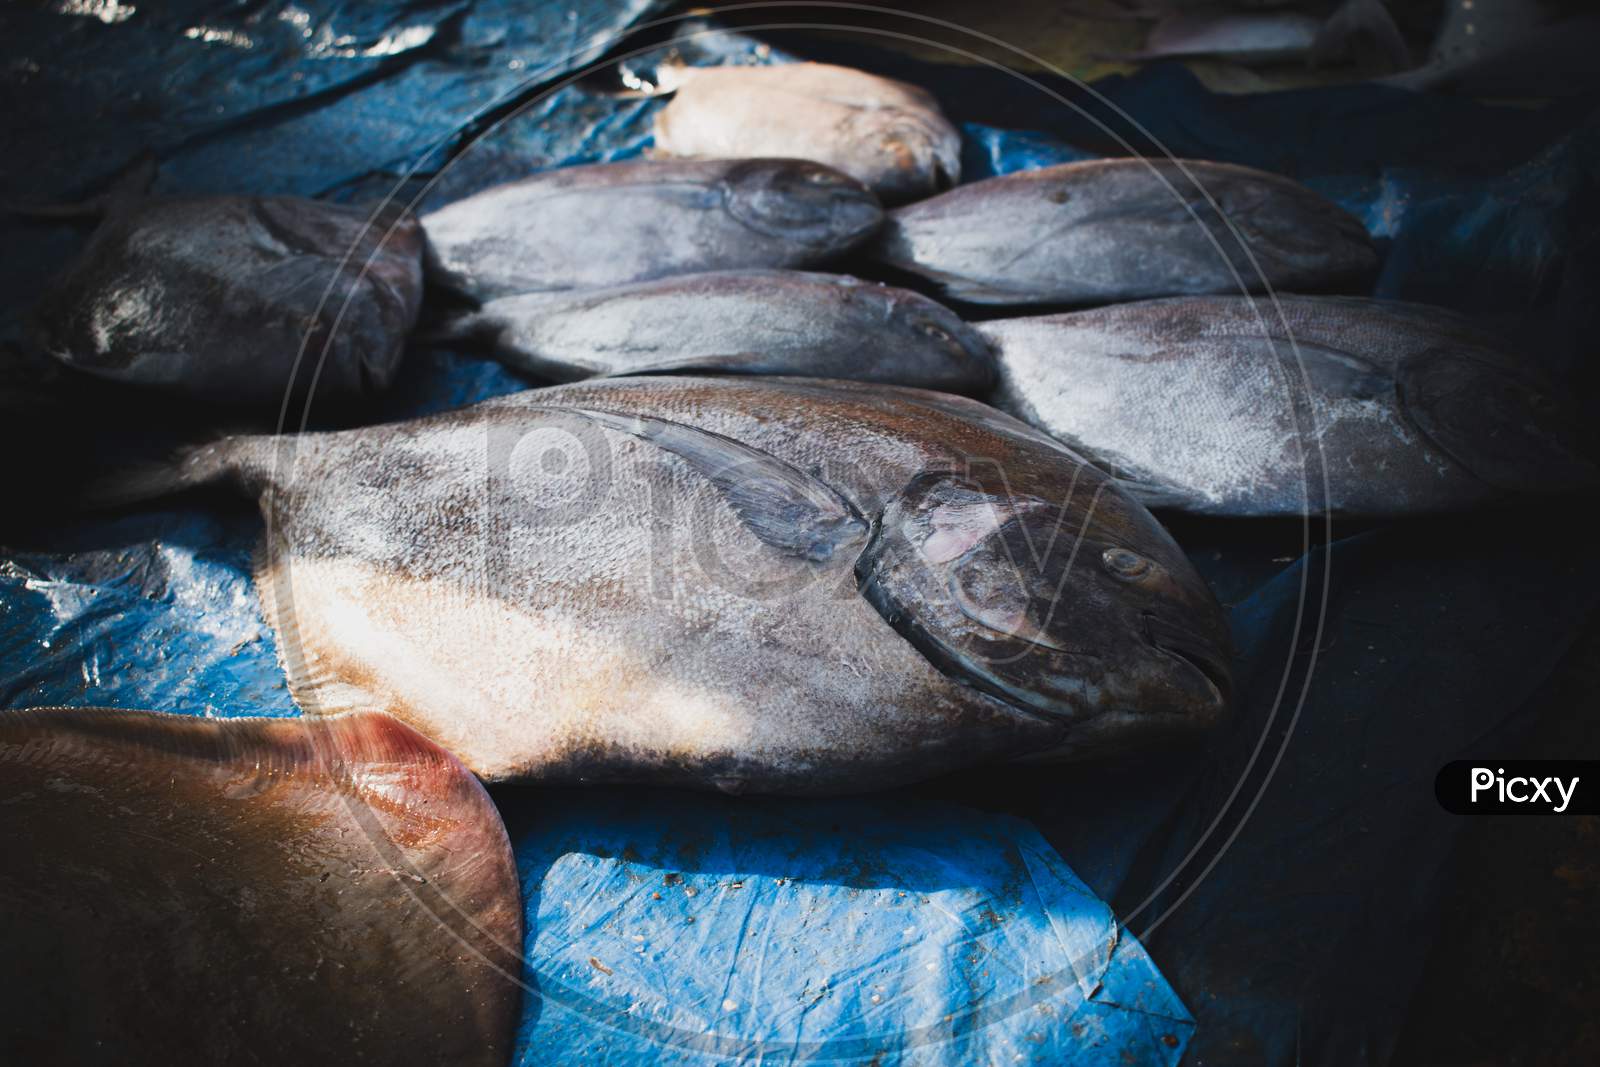 Black Pomfret Fish With Shallow Depth Of Field For Sale In The Fishmarket.